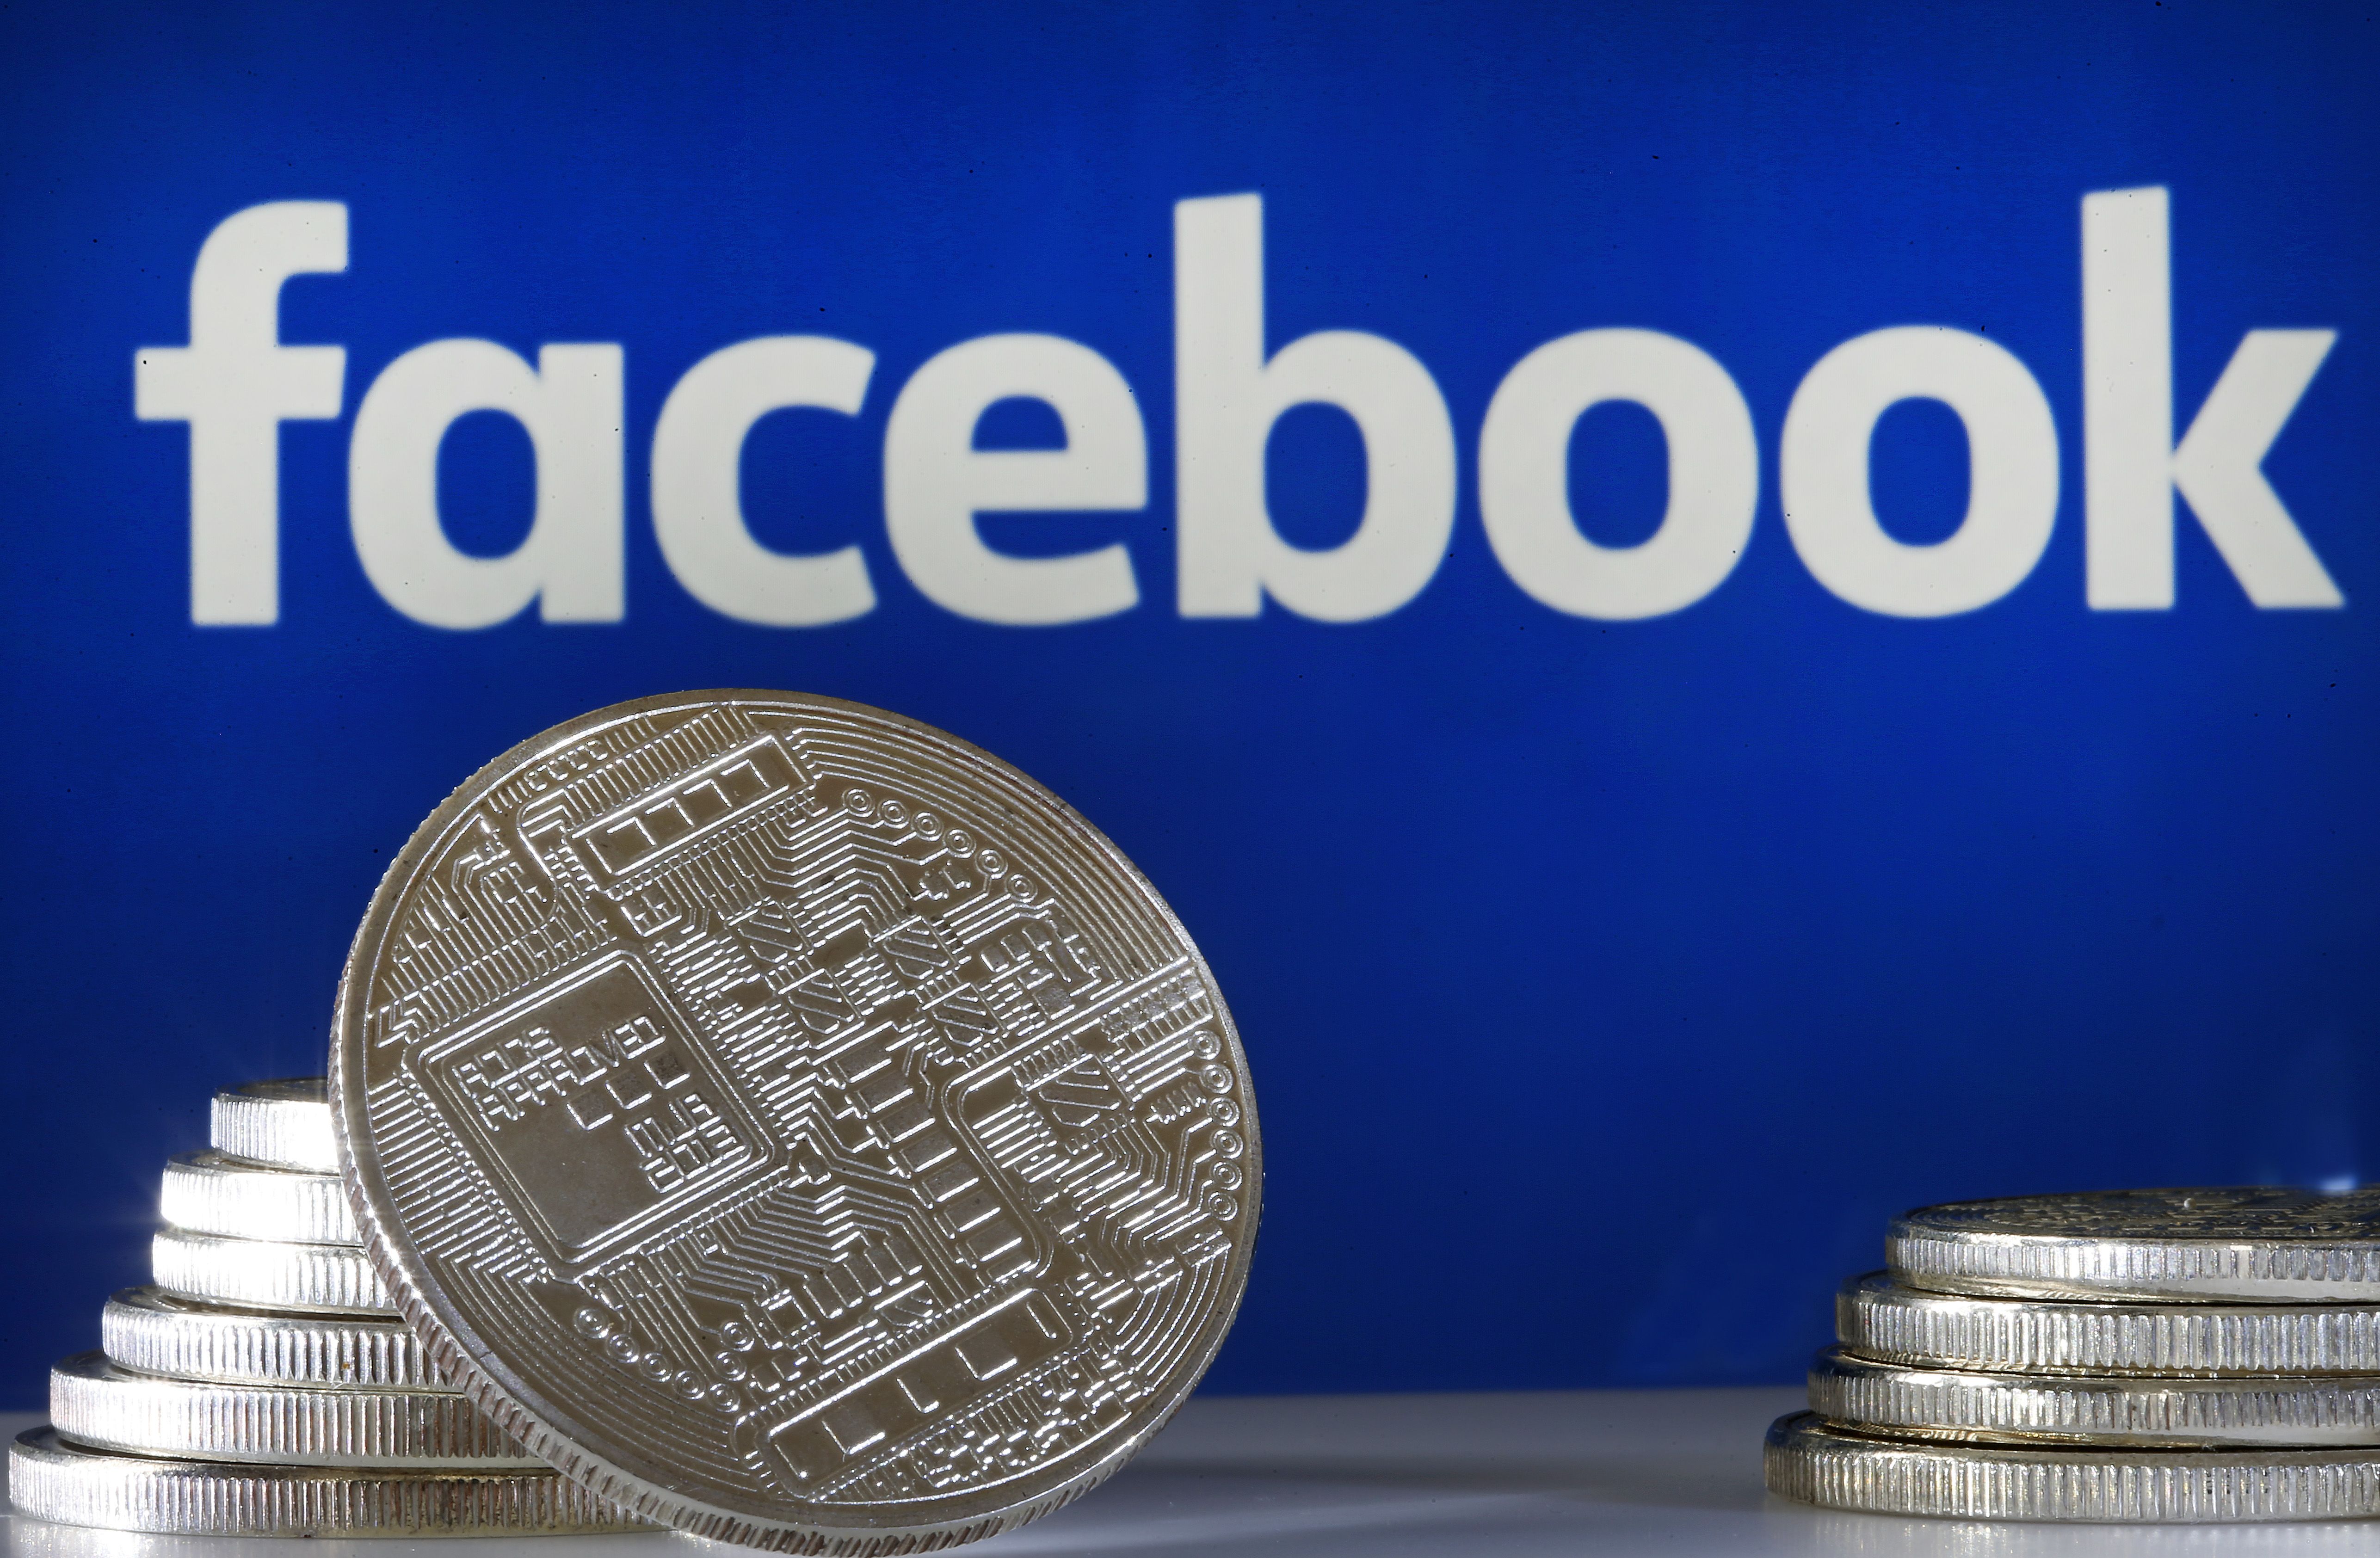 Facebook Libra cryptocurrency under fire from global policymakers